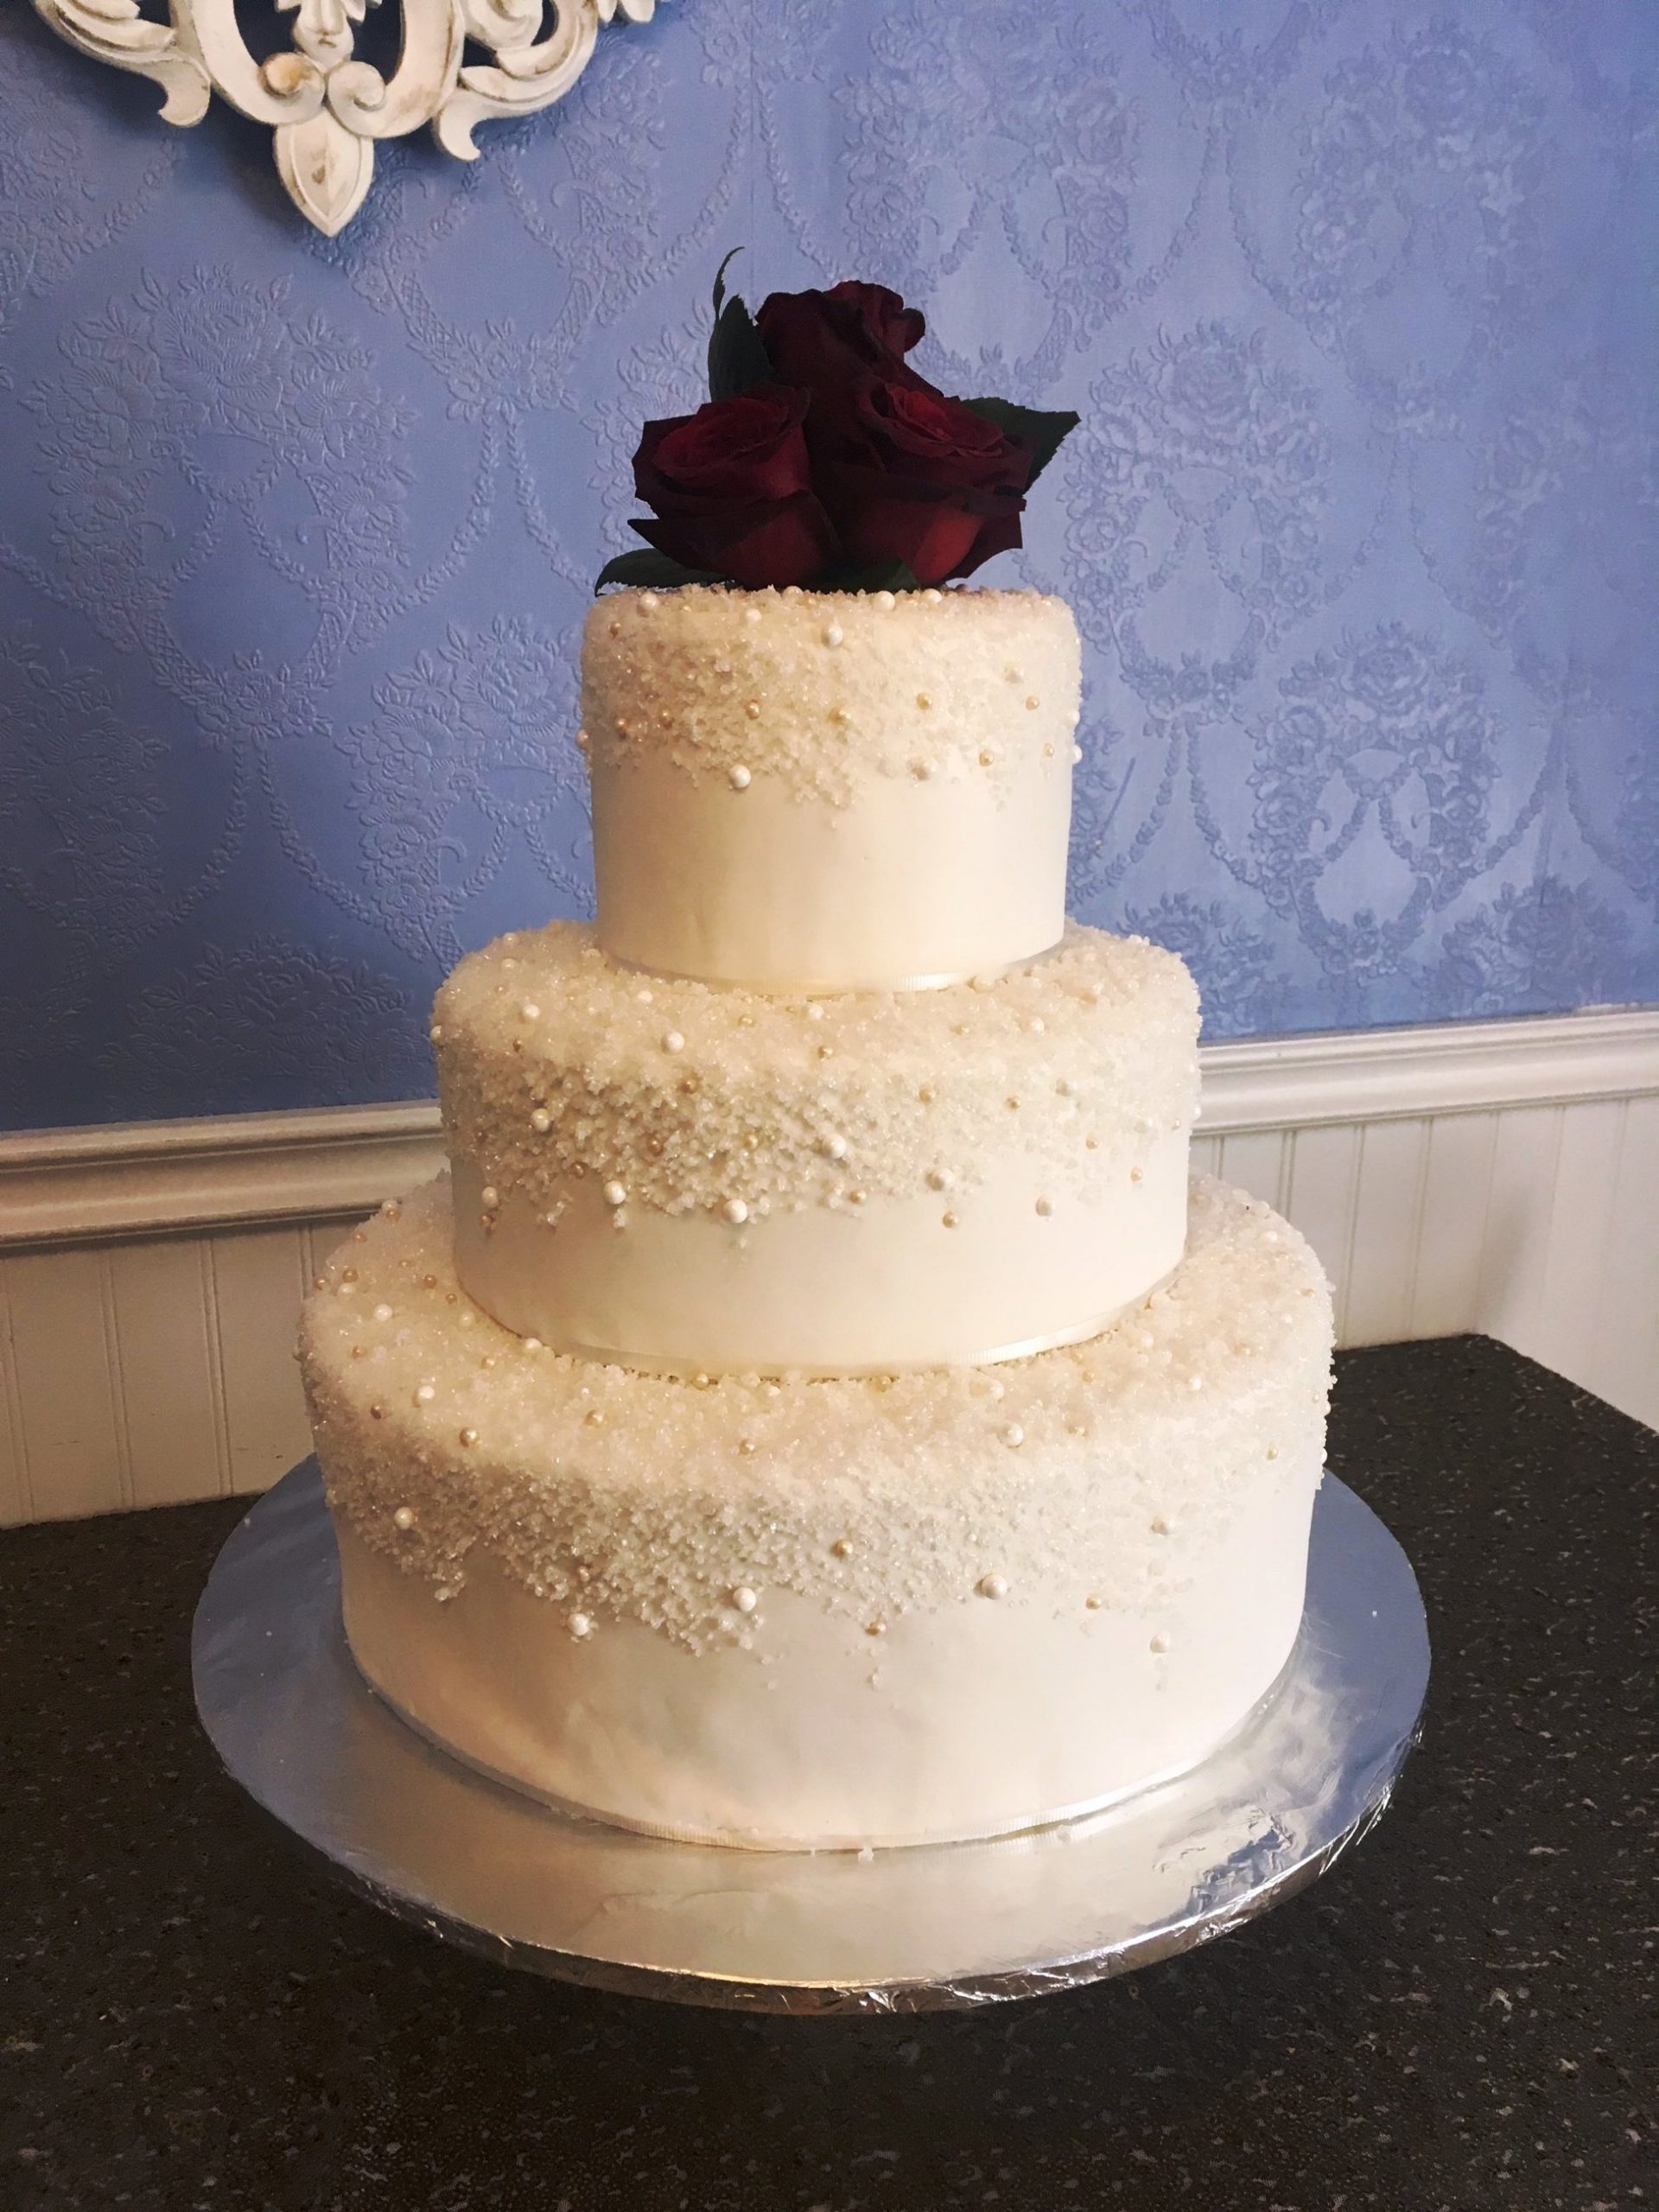 Irresistible Cakes - A beautiful 7 tier wedding cake from Irresistible Cakes.  Join for free cake sampling and consultation on any weekend to book your wedding  cake. #wedding #freecakesampling #cakesampling #weddingplanning #icakes |  Facebook